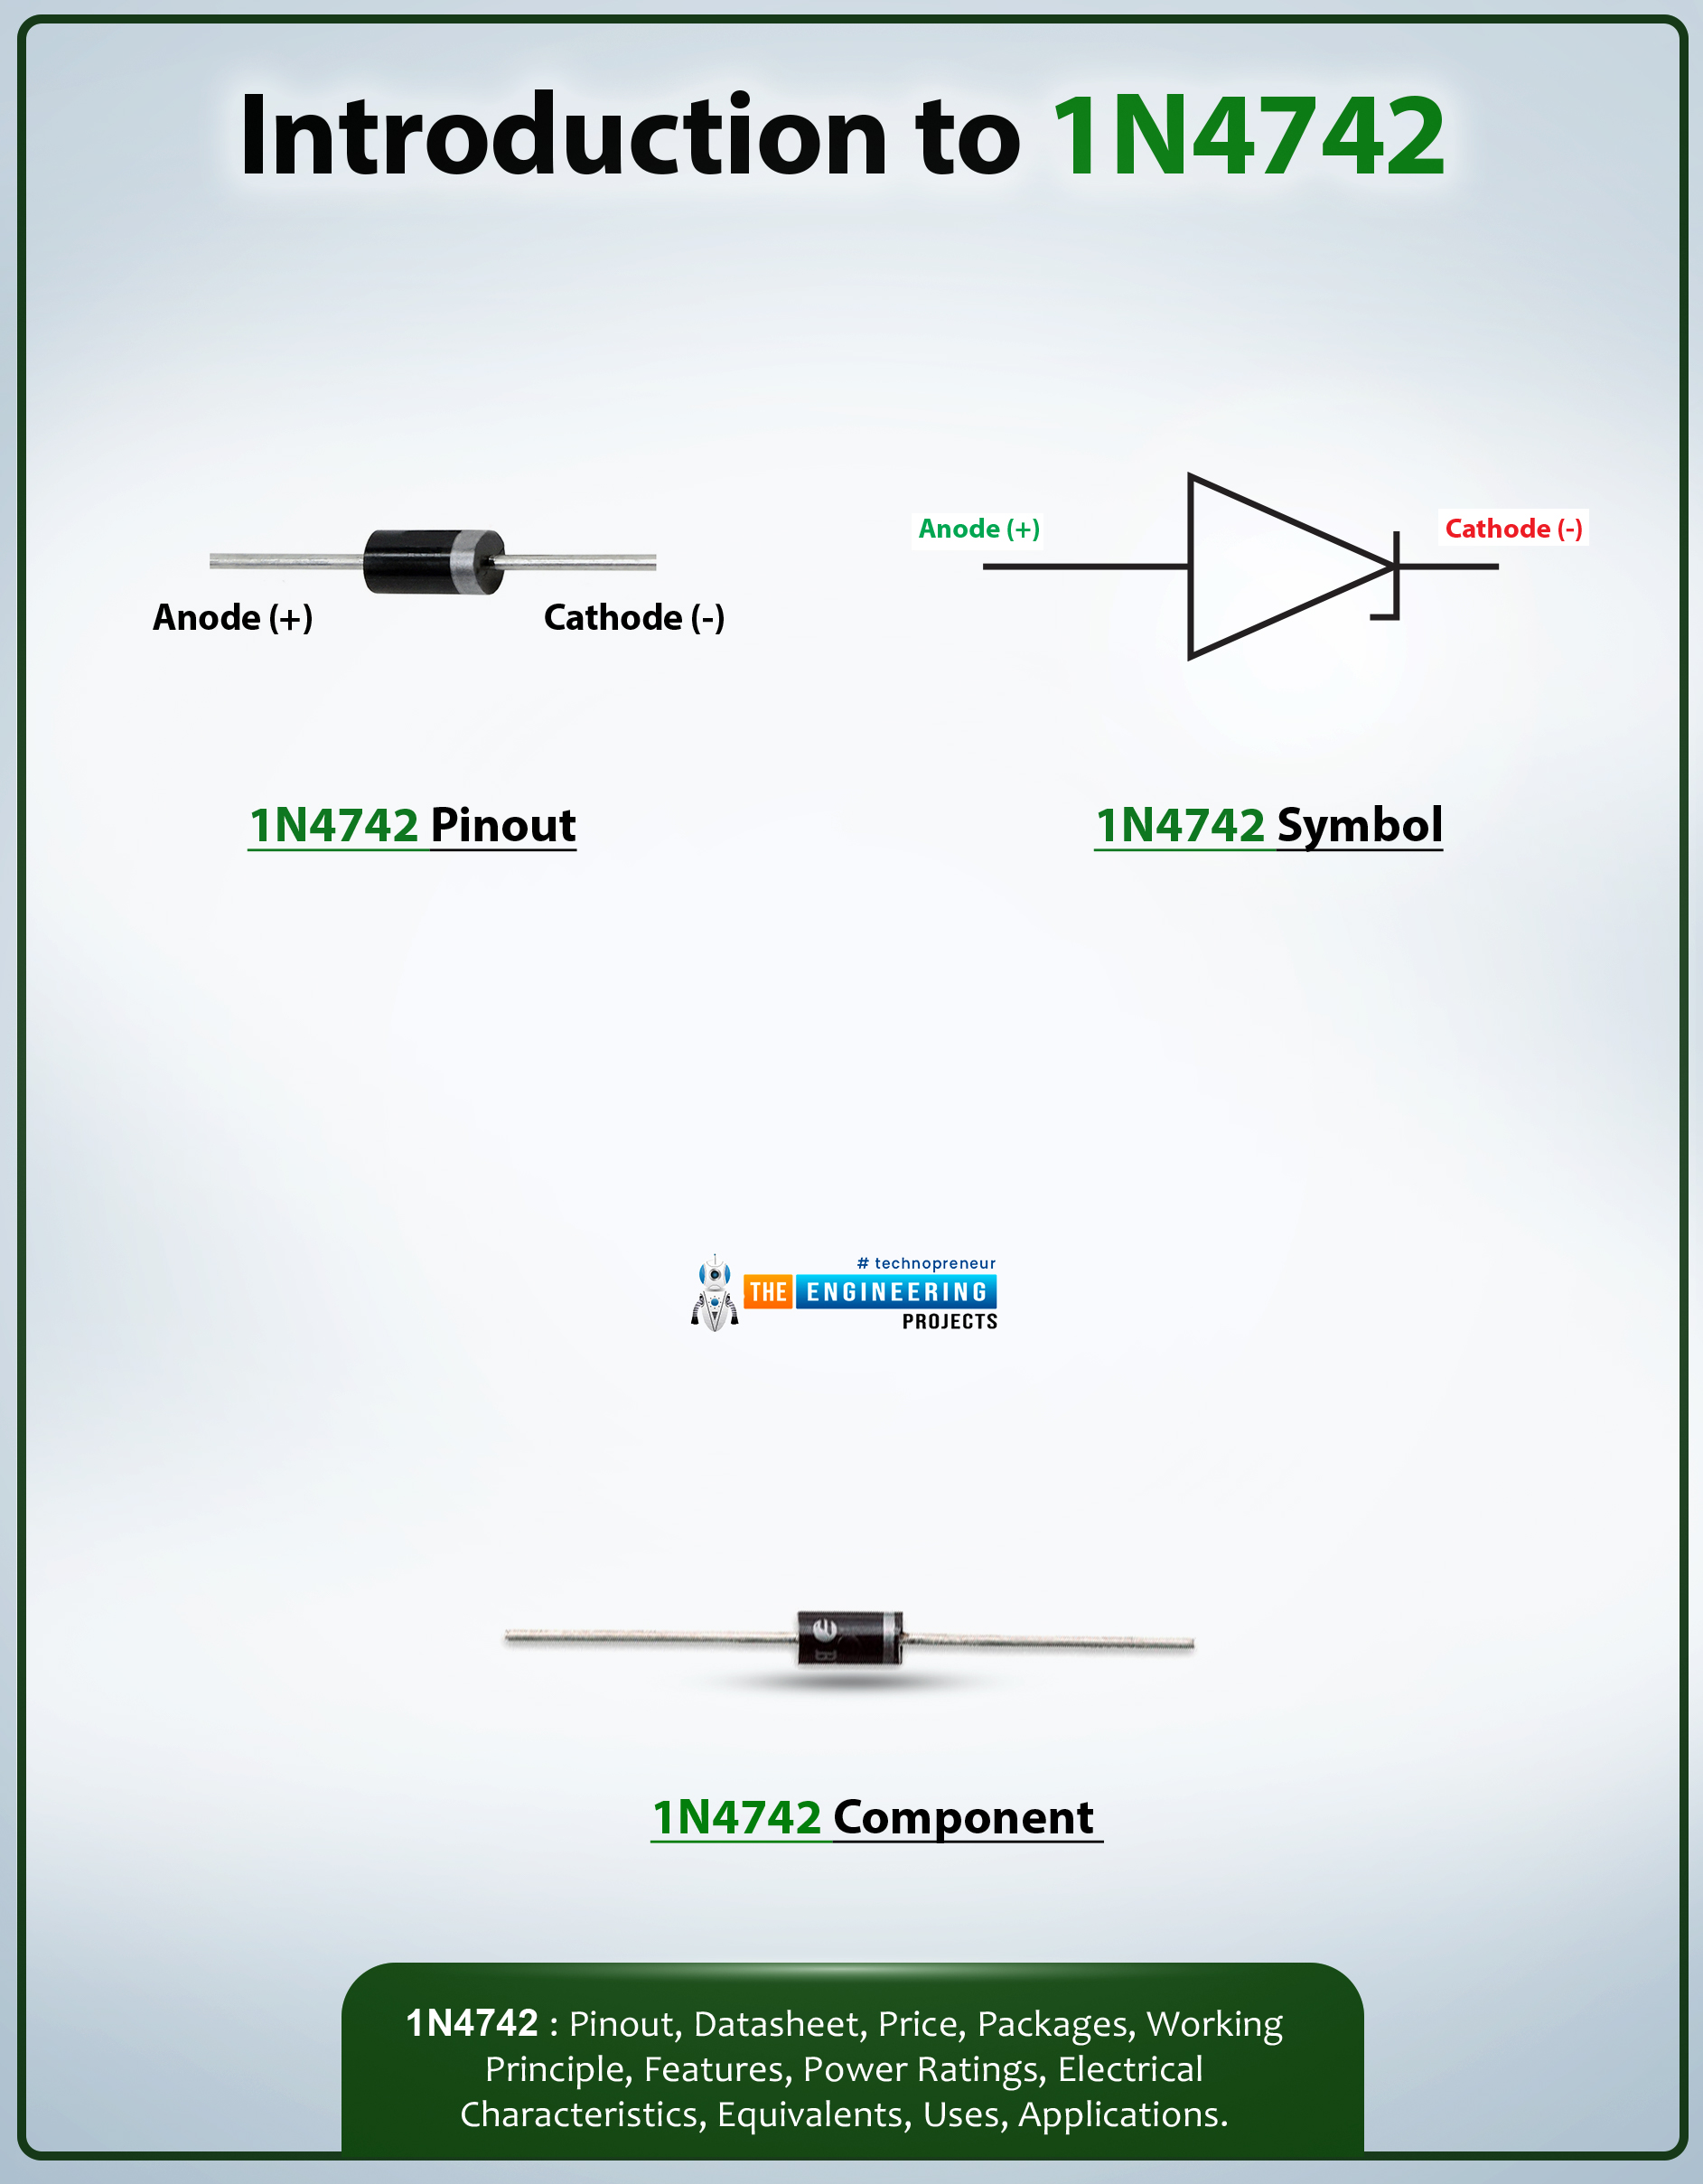 Introduction to 1n4742, 1n4742 pinout, 1n4742 features, 1n4742 applications